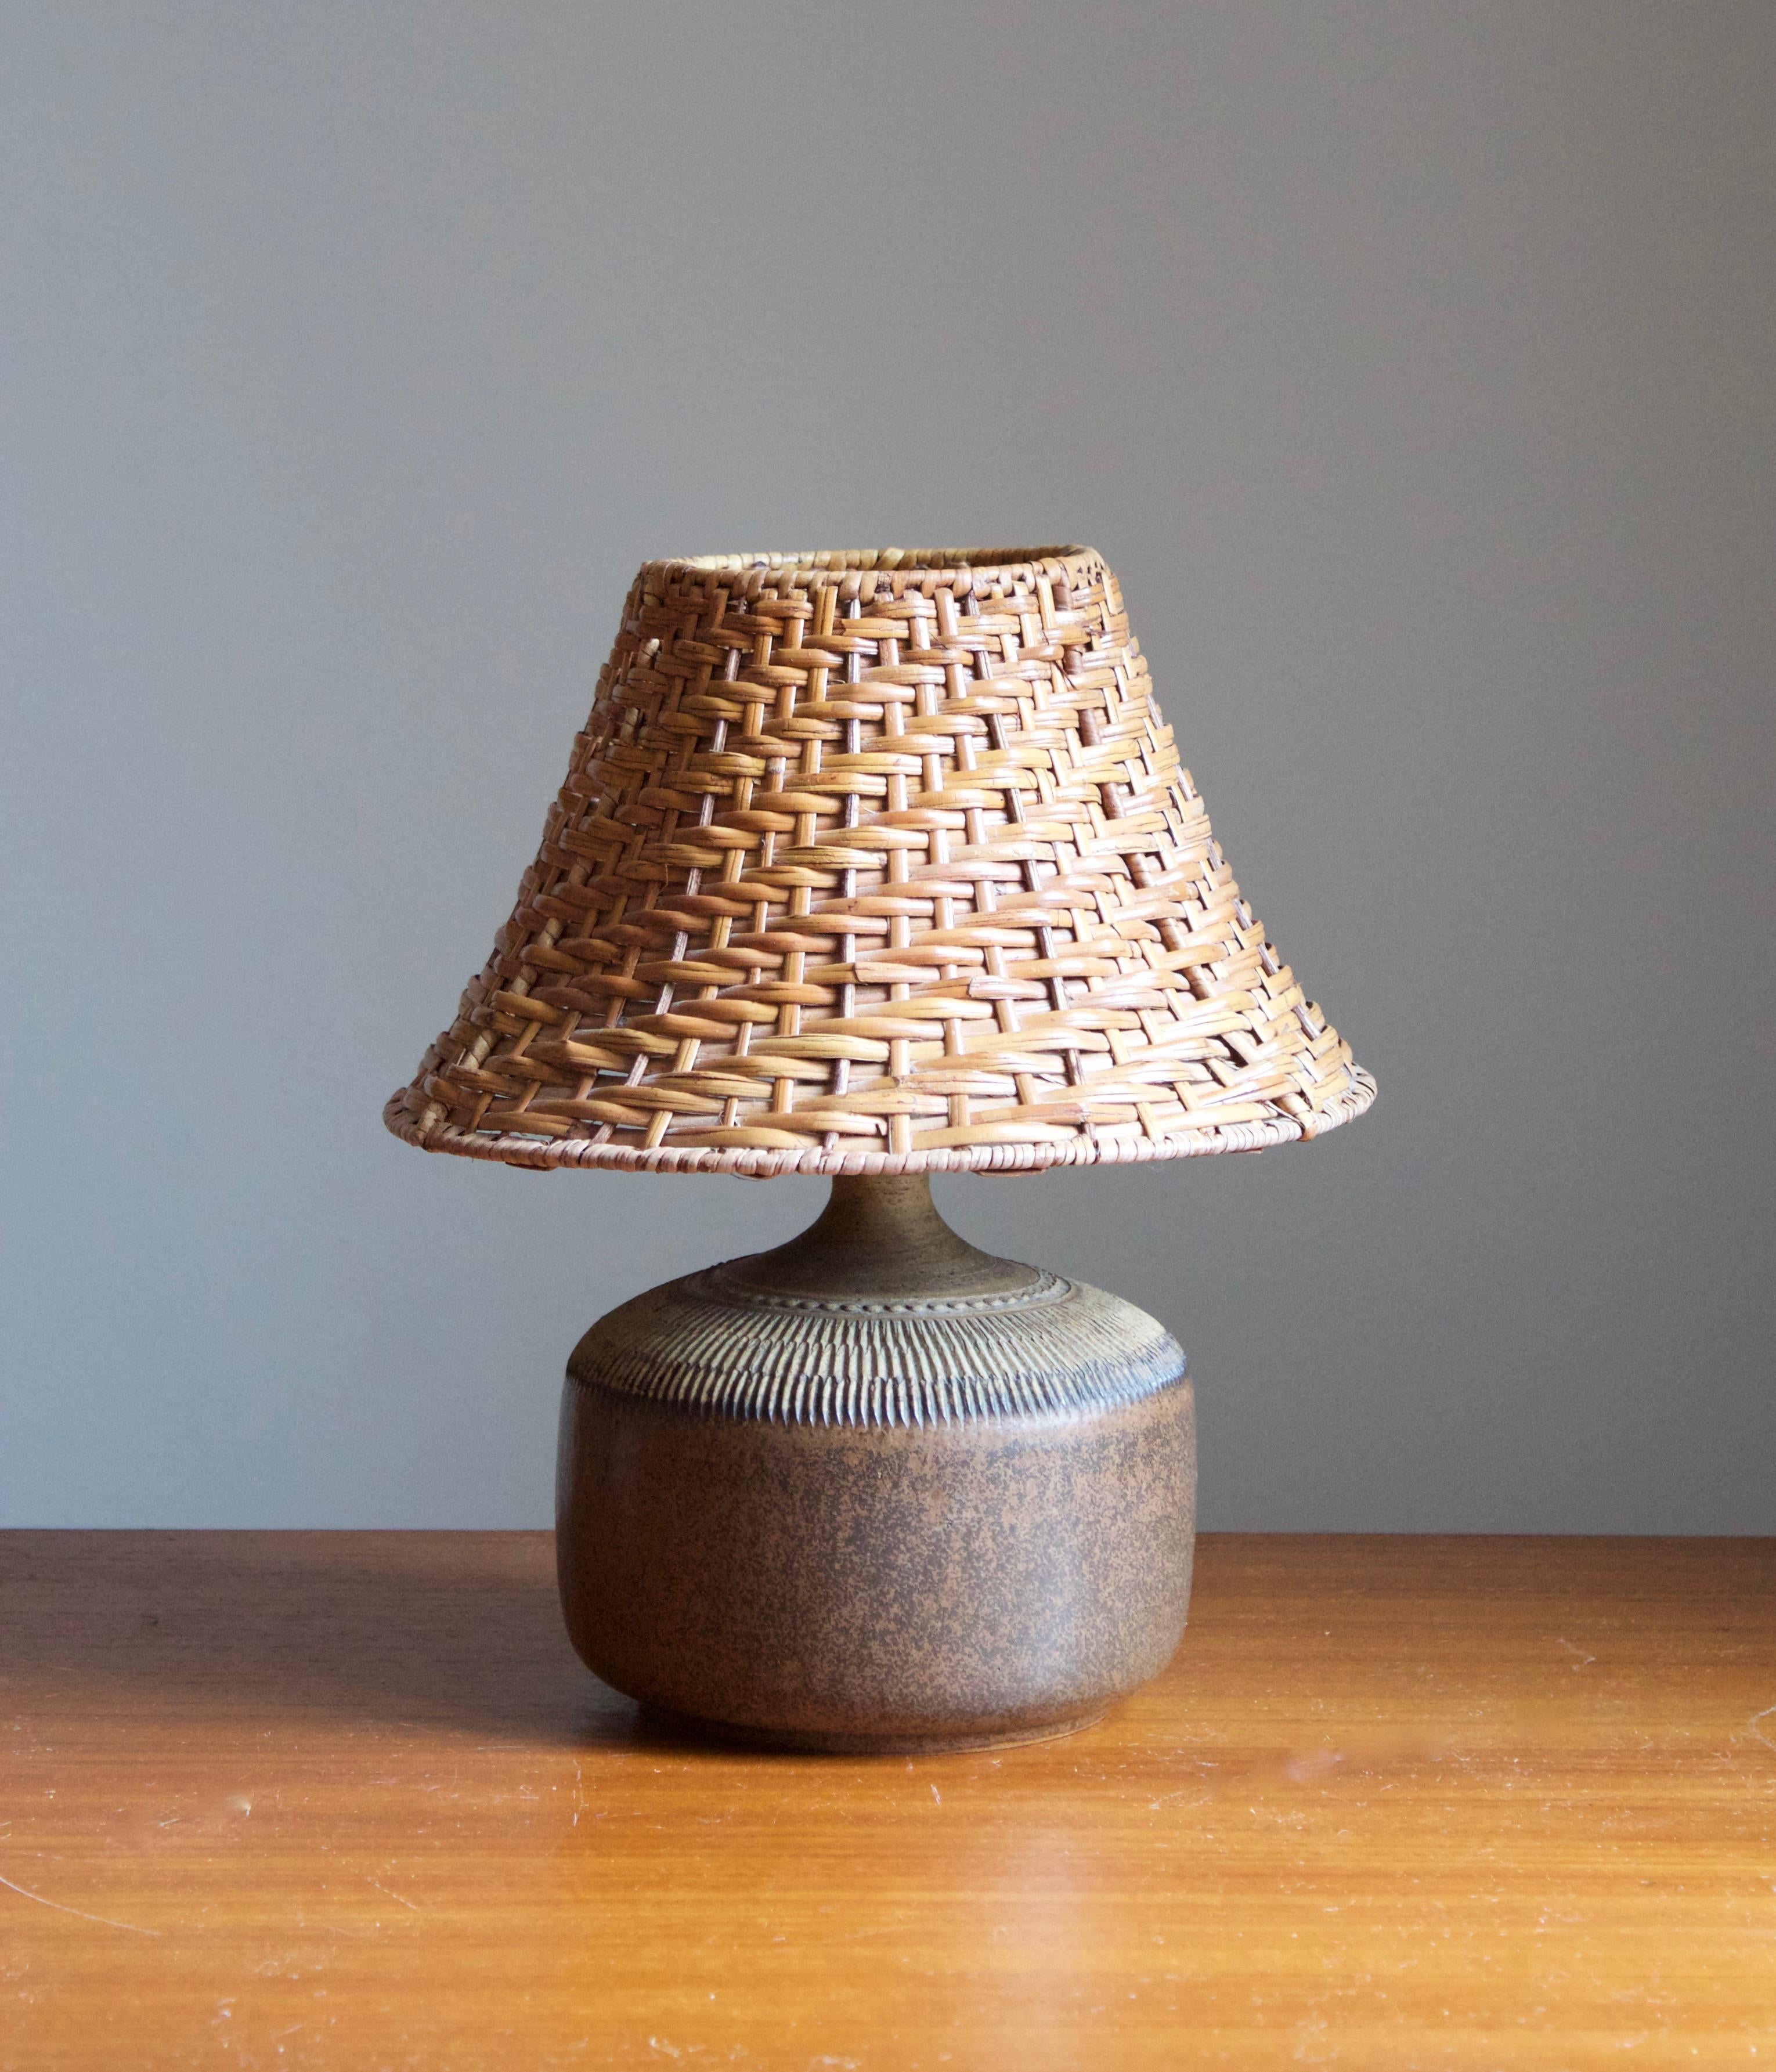 A table lamp by Klase Höganäs. In stoneware with simple incised decor. Signed. 

Dimensions stated exclude lampshade. Height includes socket. Vintage rattan lampshade of illustrated model can be included upon request.

Glaze features brown-green